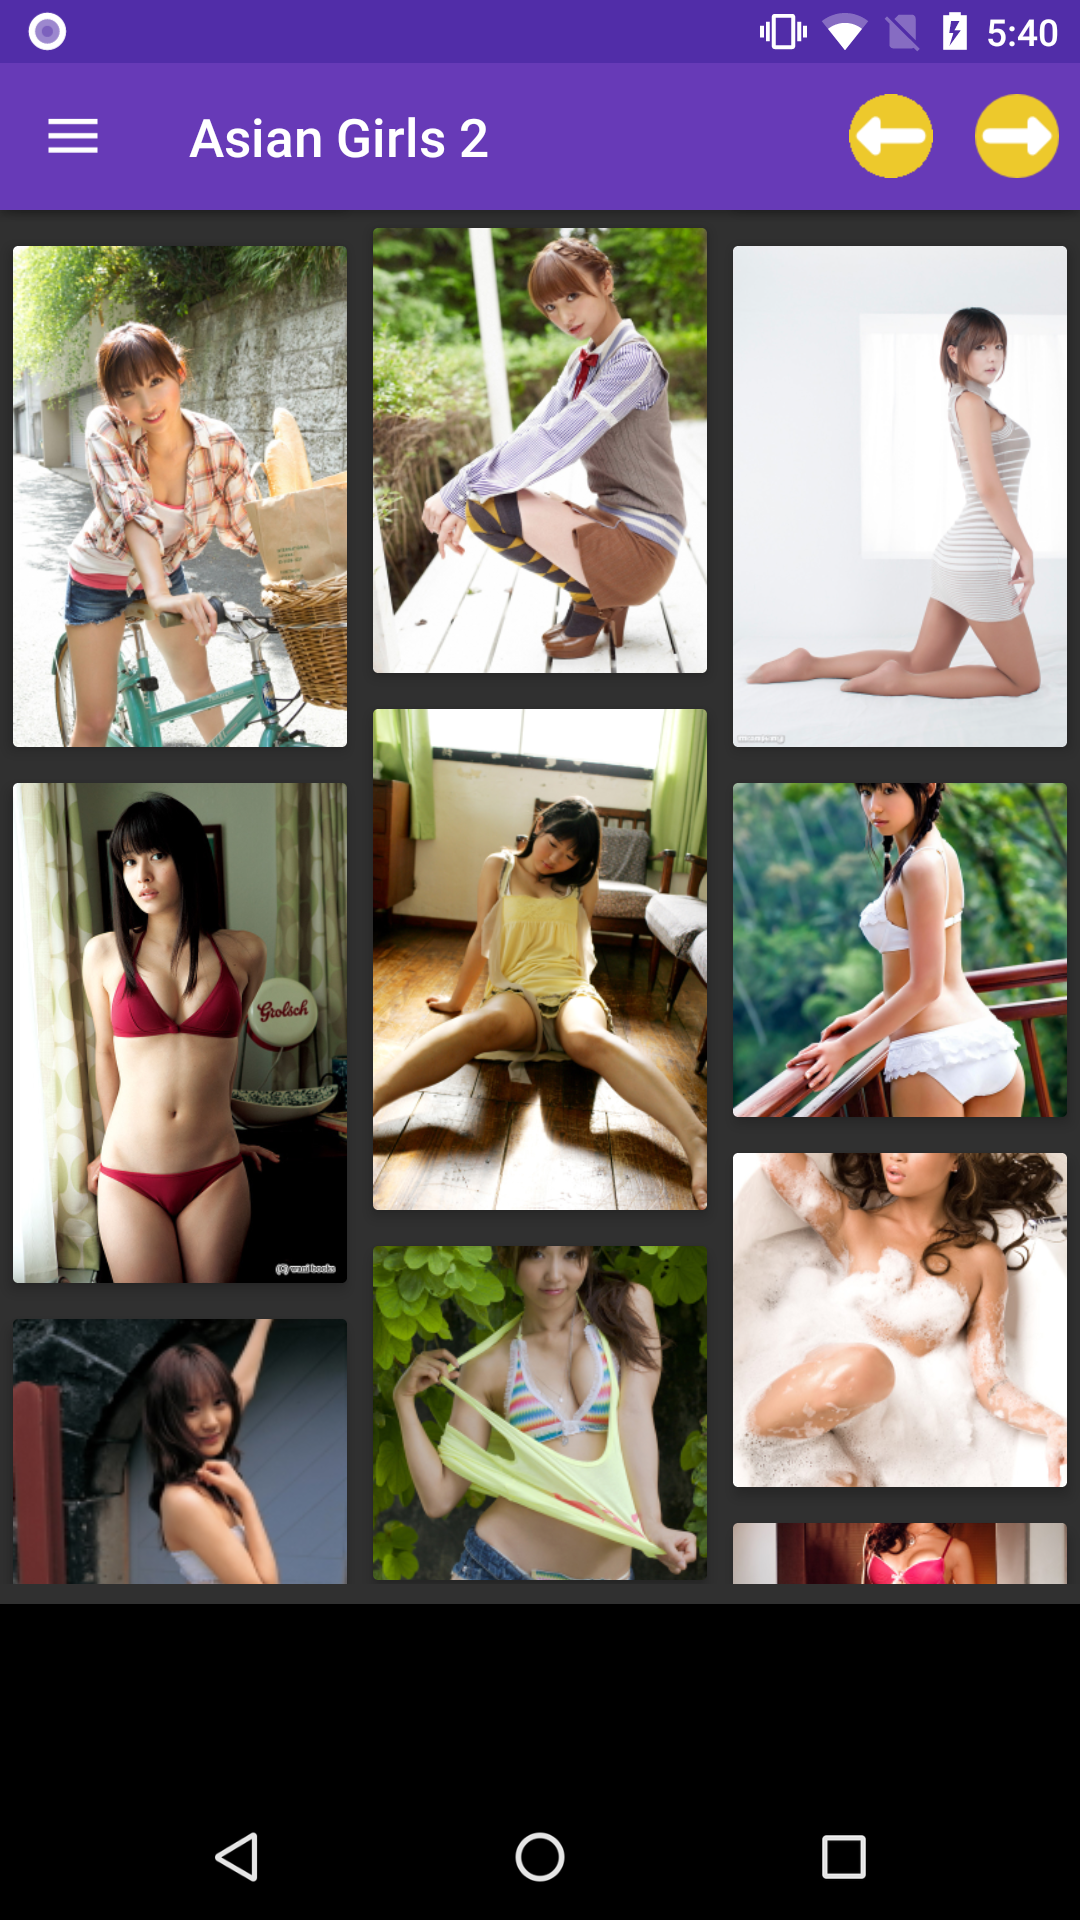 Sexy Asian Girls app,wallpaper,sexy,amateur,porn,hentei,download,china,apps,image,galleries,photos,japan,asian,korean,sex,girls,pics,hentia,hentai,henti,picture